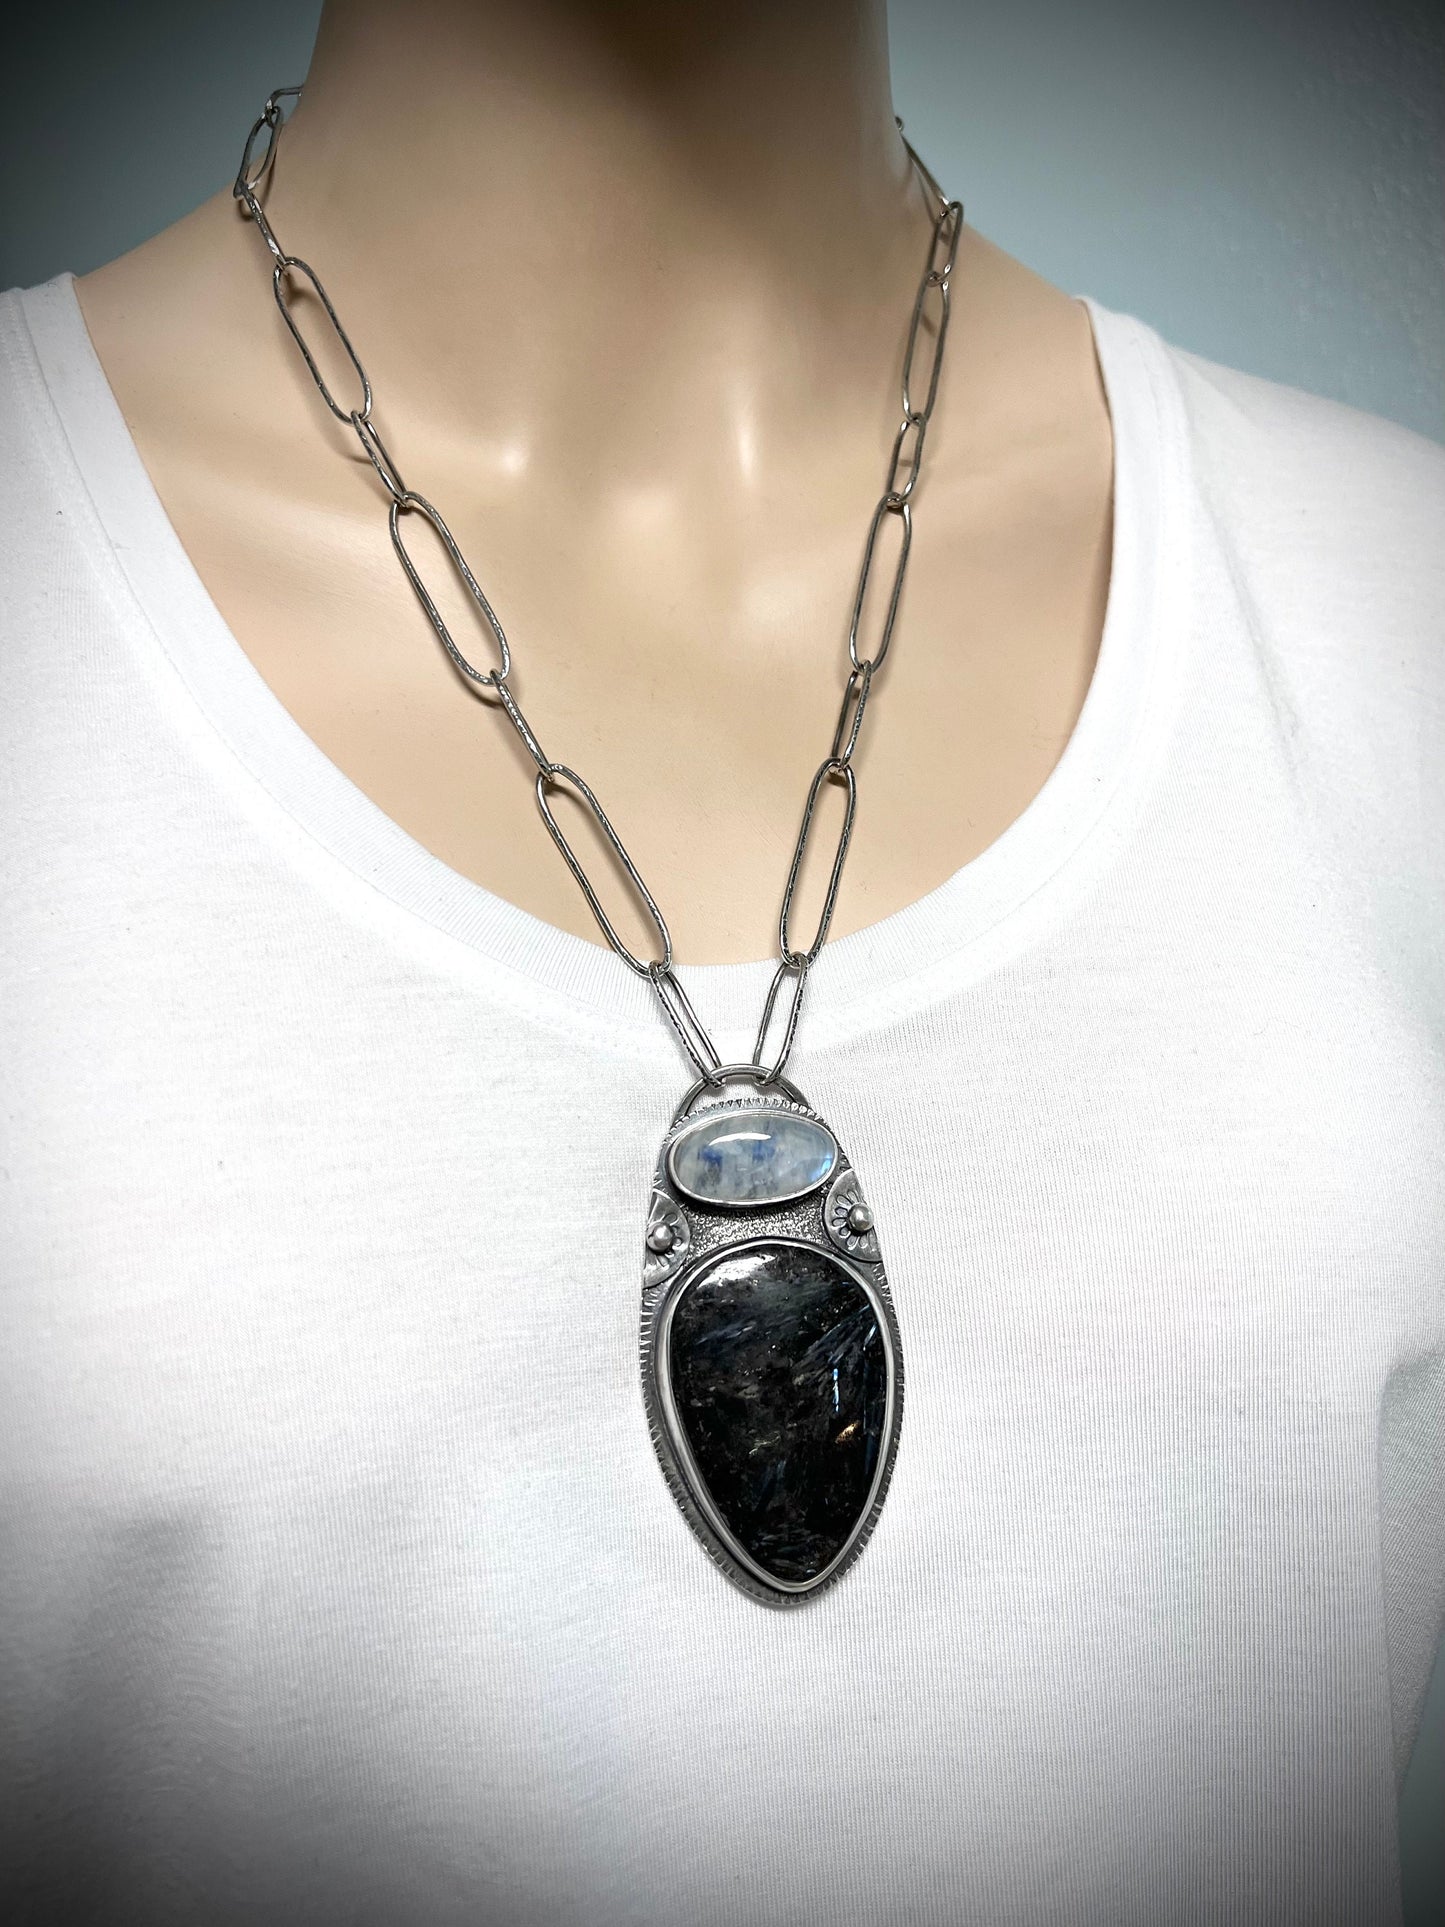 Rainbow Moonstone and Pietersite Sterling Silver Necklace - Handmade One-of-a-kind Pendant on Sterling Silver Chain